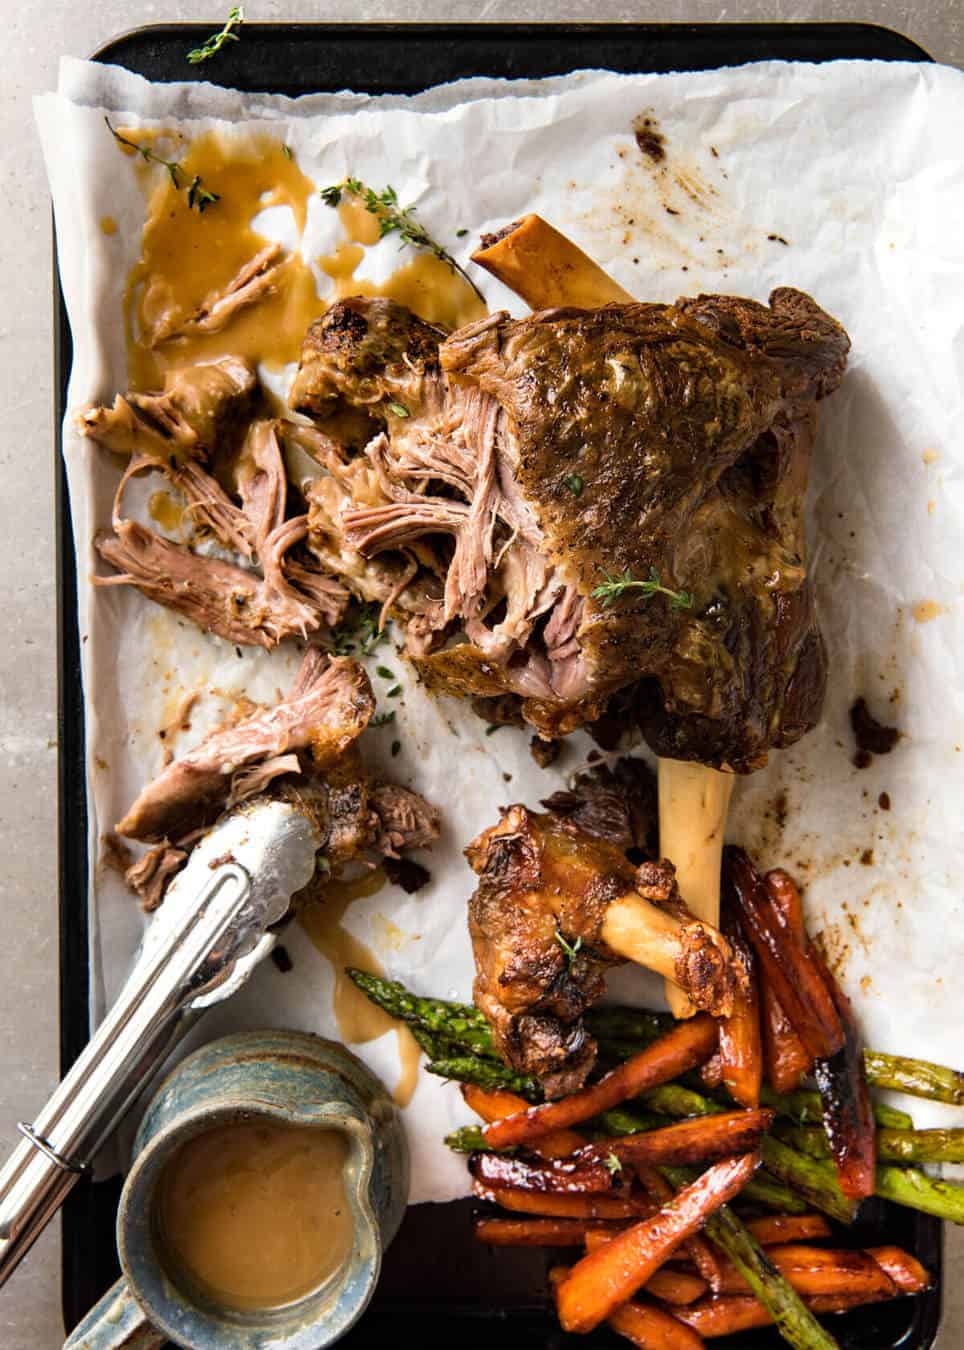 The most succulent and easiest lamb leg ever, this Slow Cooker Roast Lamb Leg takes minutes to prepare. The gravy is incredible! www.recipetineats.com